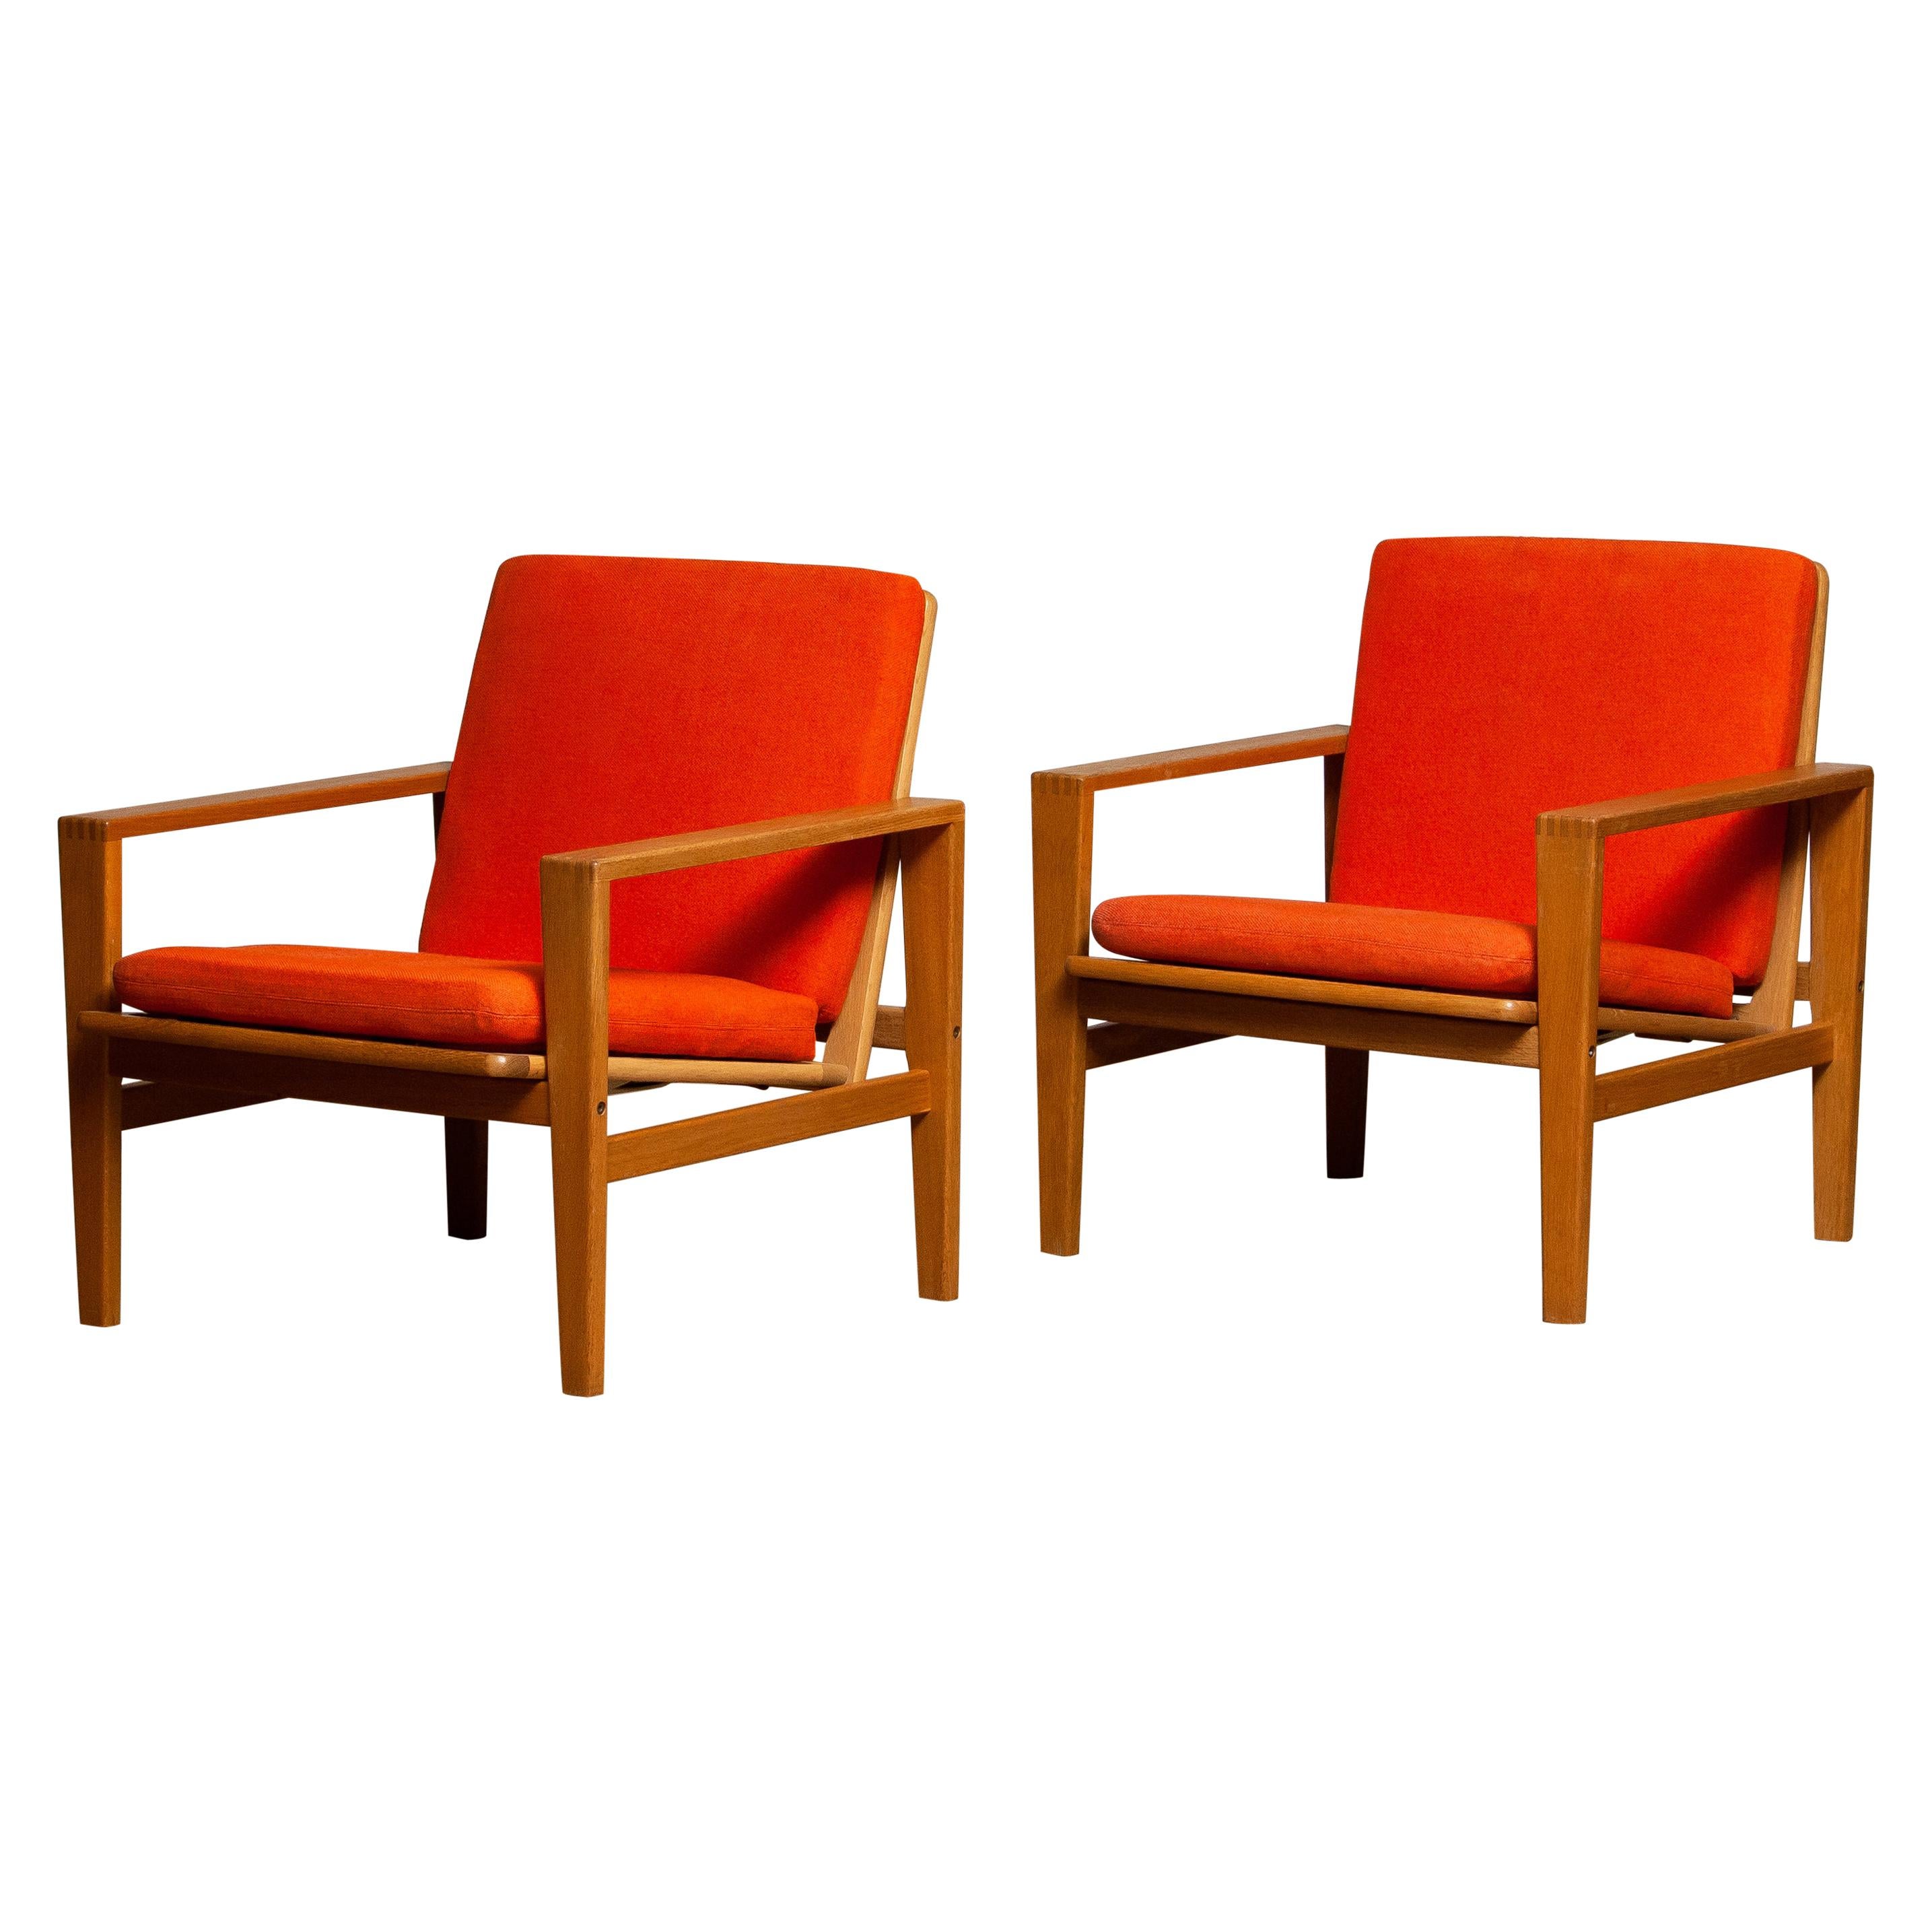 Scandinavian Modern 1960s Pair of Lounge / Easy Chairs in Oak Leather Fabric by Erik Merthen for Ire